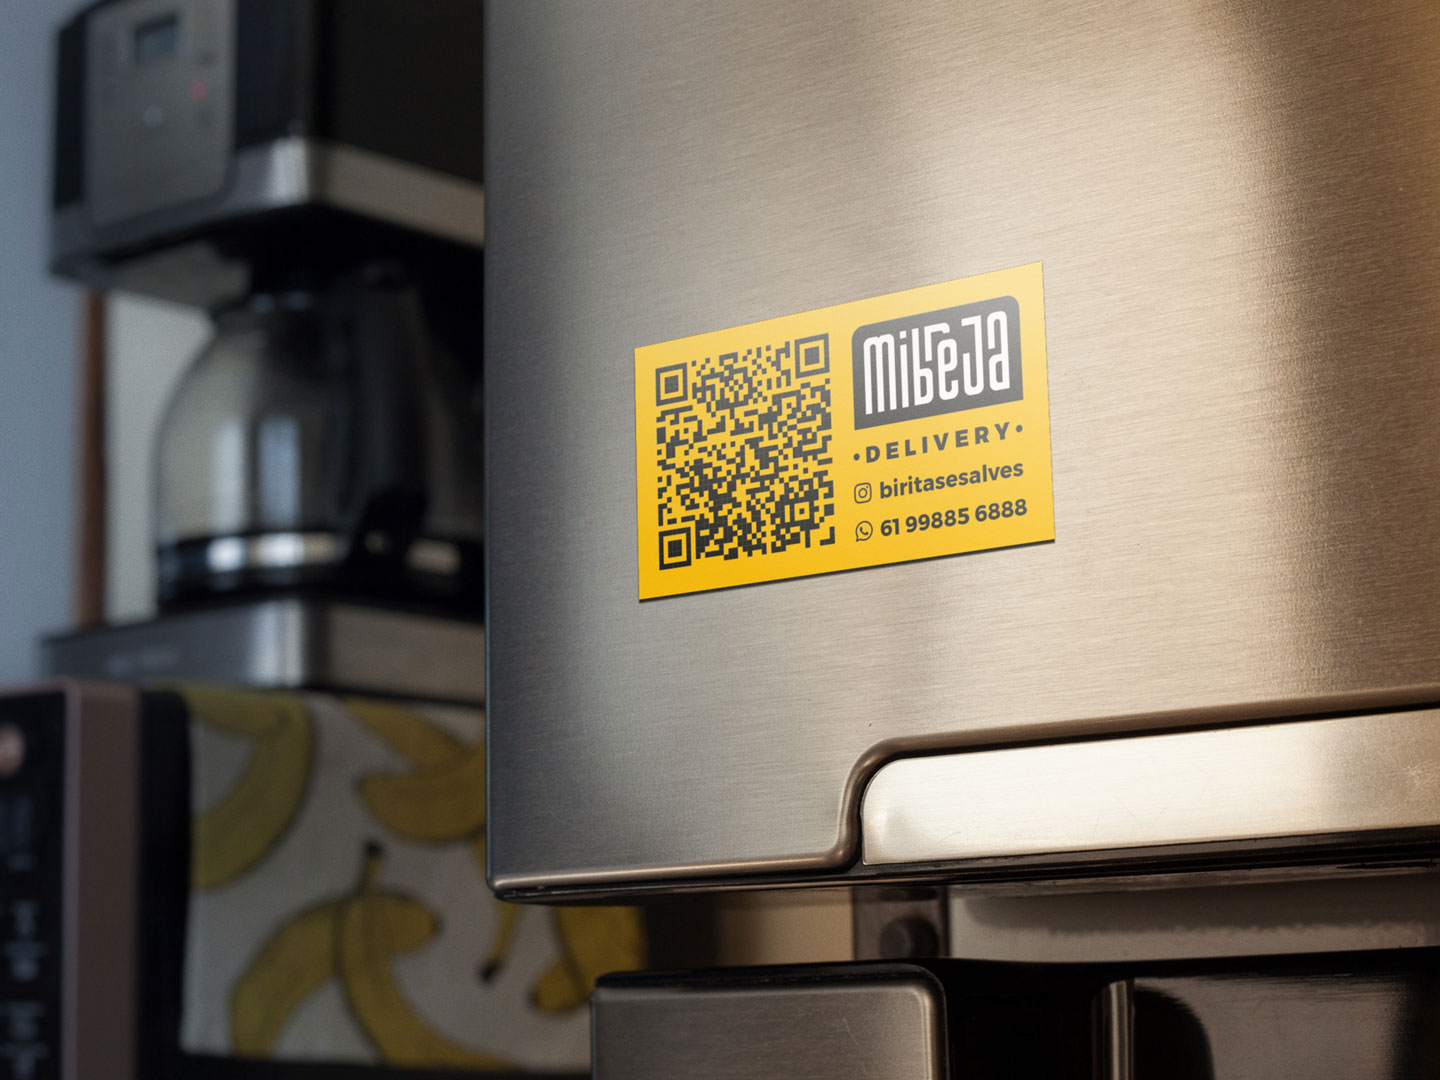 fridge-magnet-mockup-with-a-coffee-machine-and-bananas-print-in-the-back-a14789